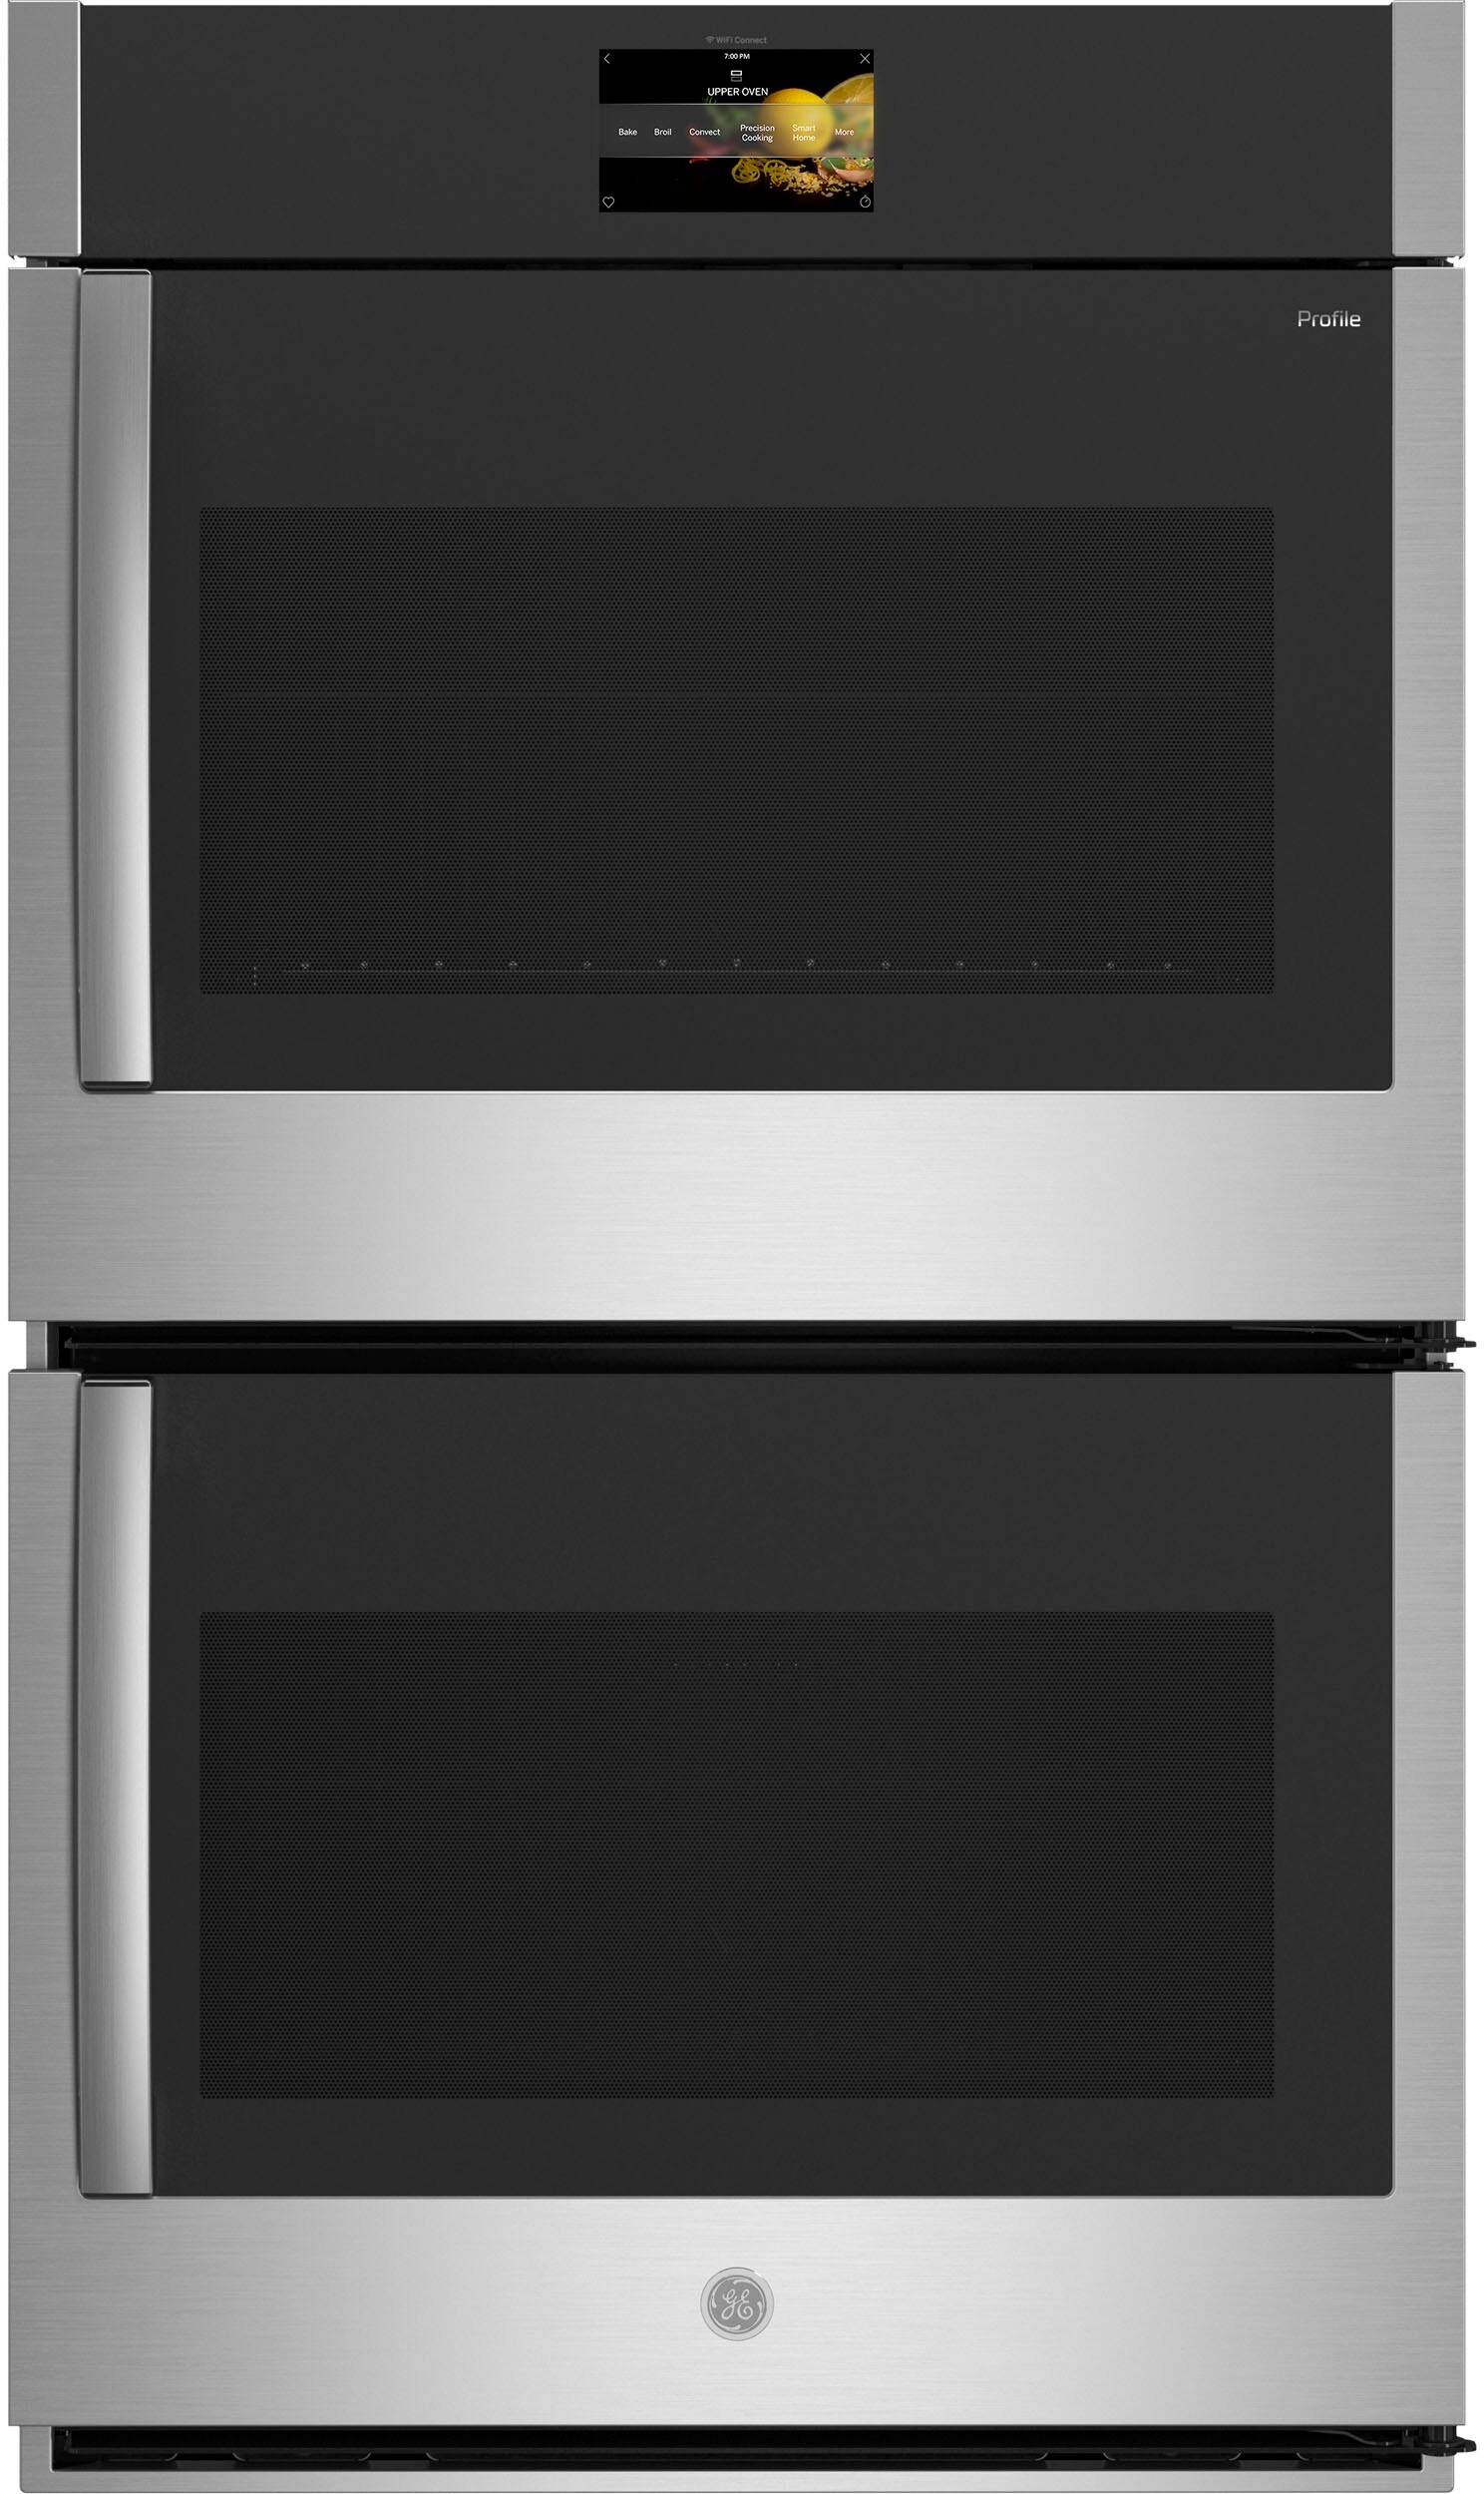 Profile 30"" Double Electric Wall Oven - GE PTD700RSNSS